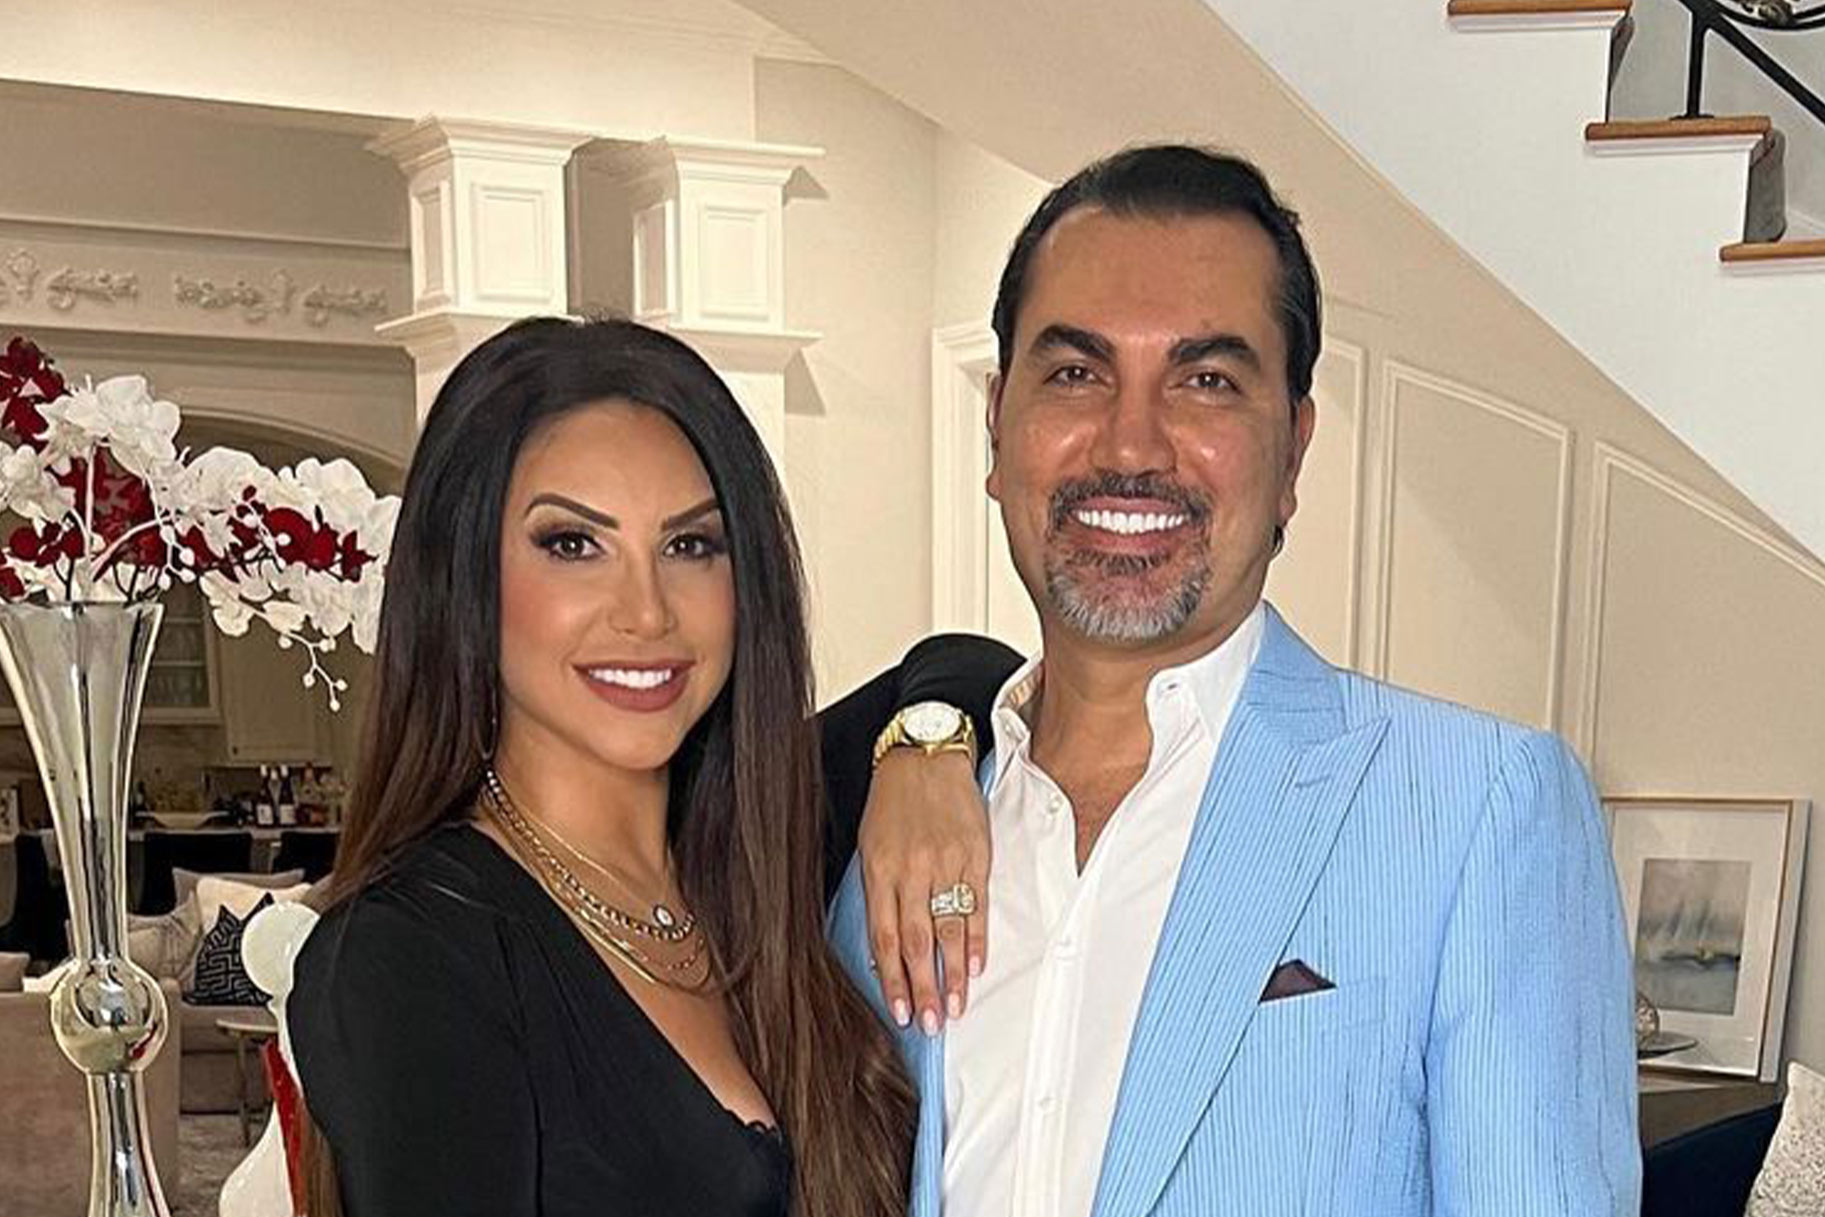 Jennifer Aydin and Bill Aydin of The Real Housewives of New Jersey.